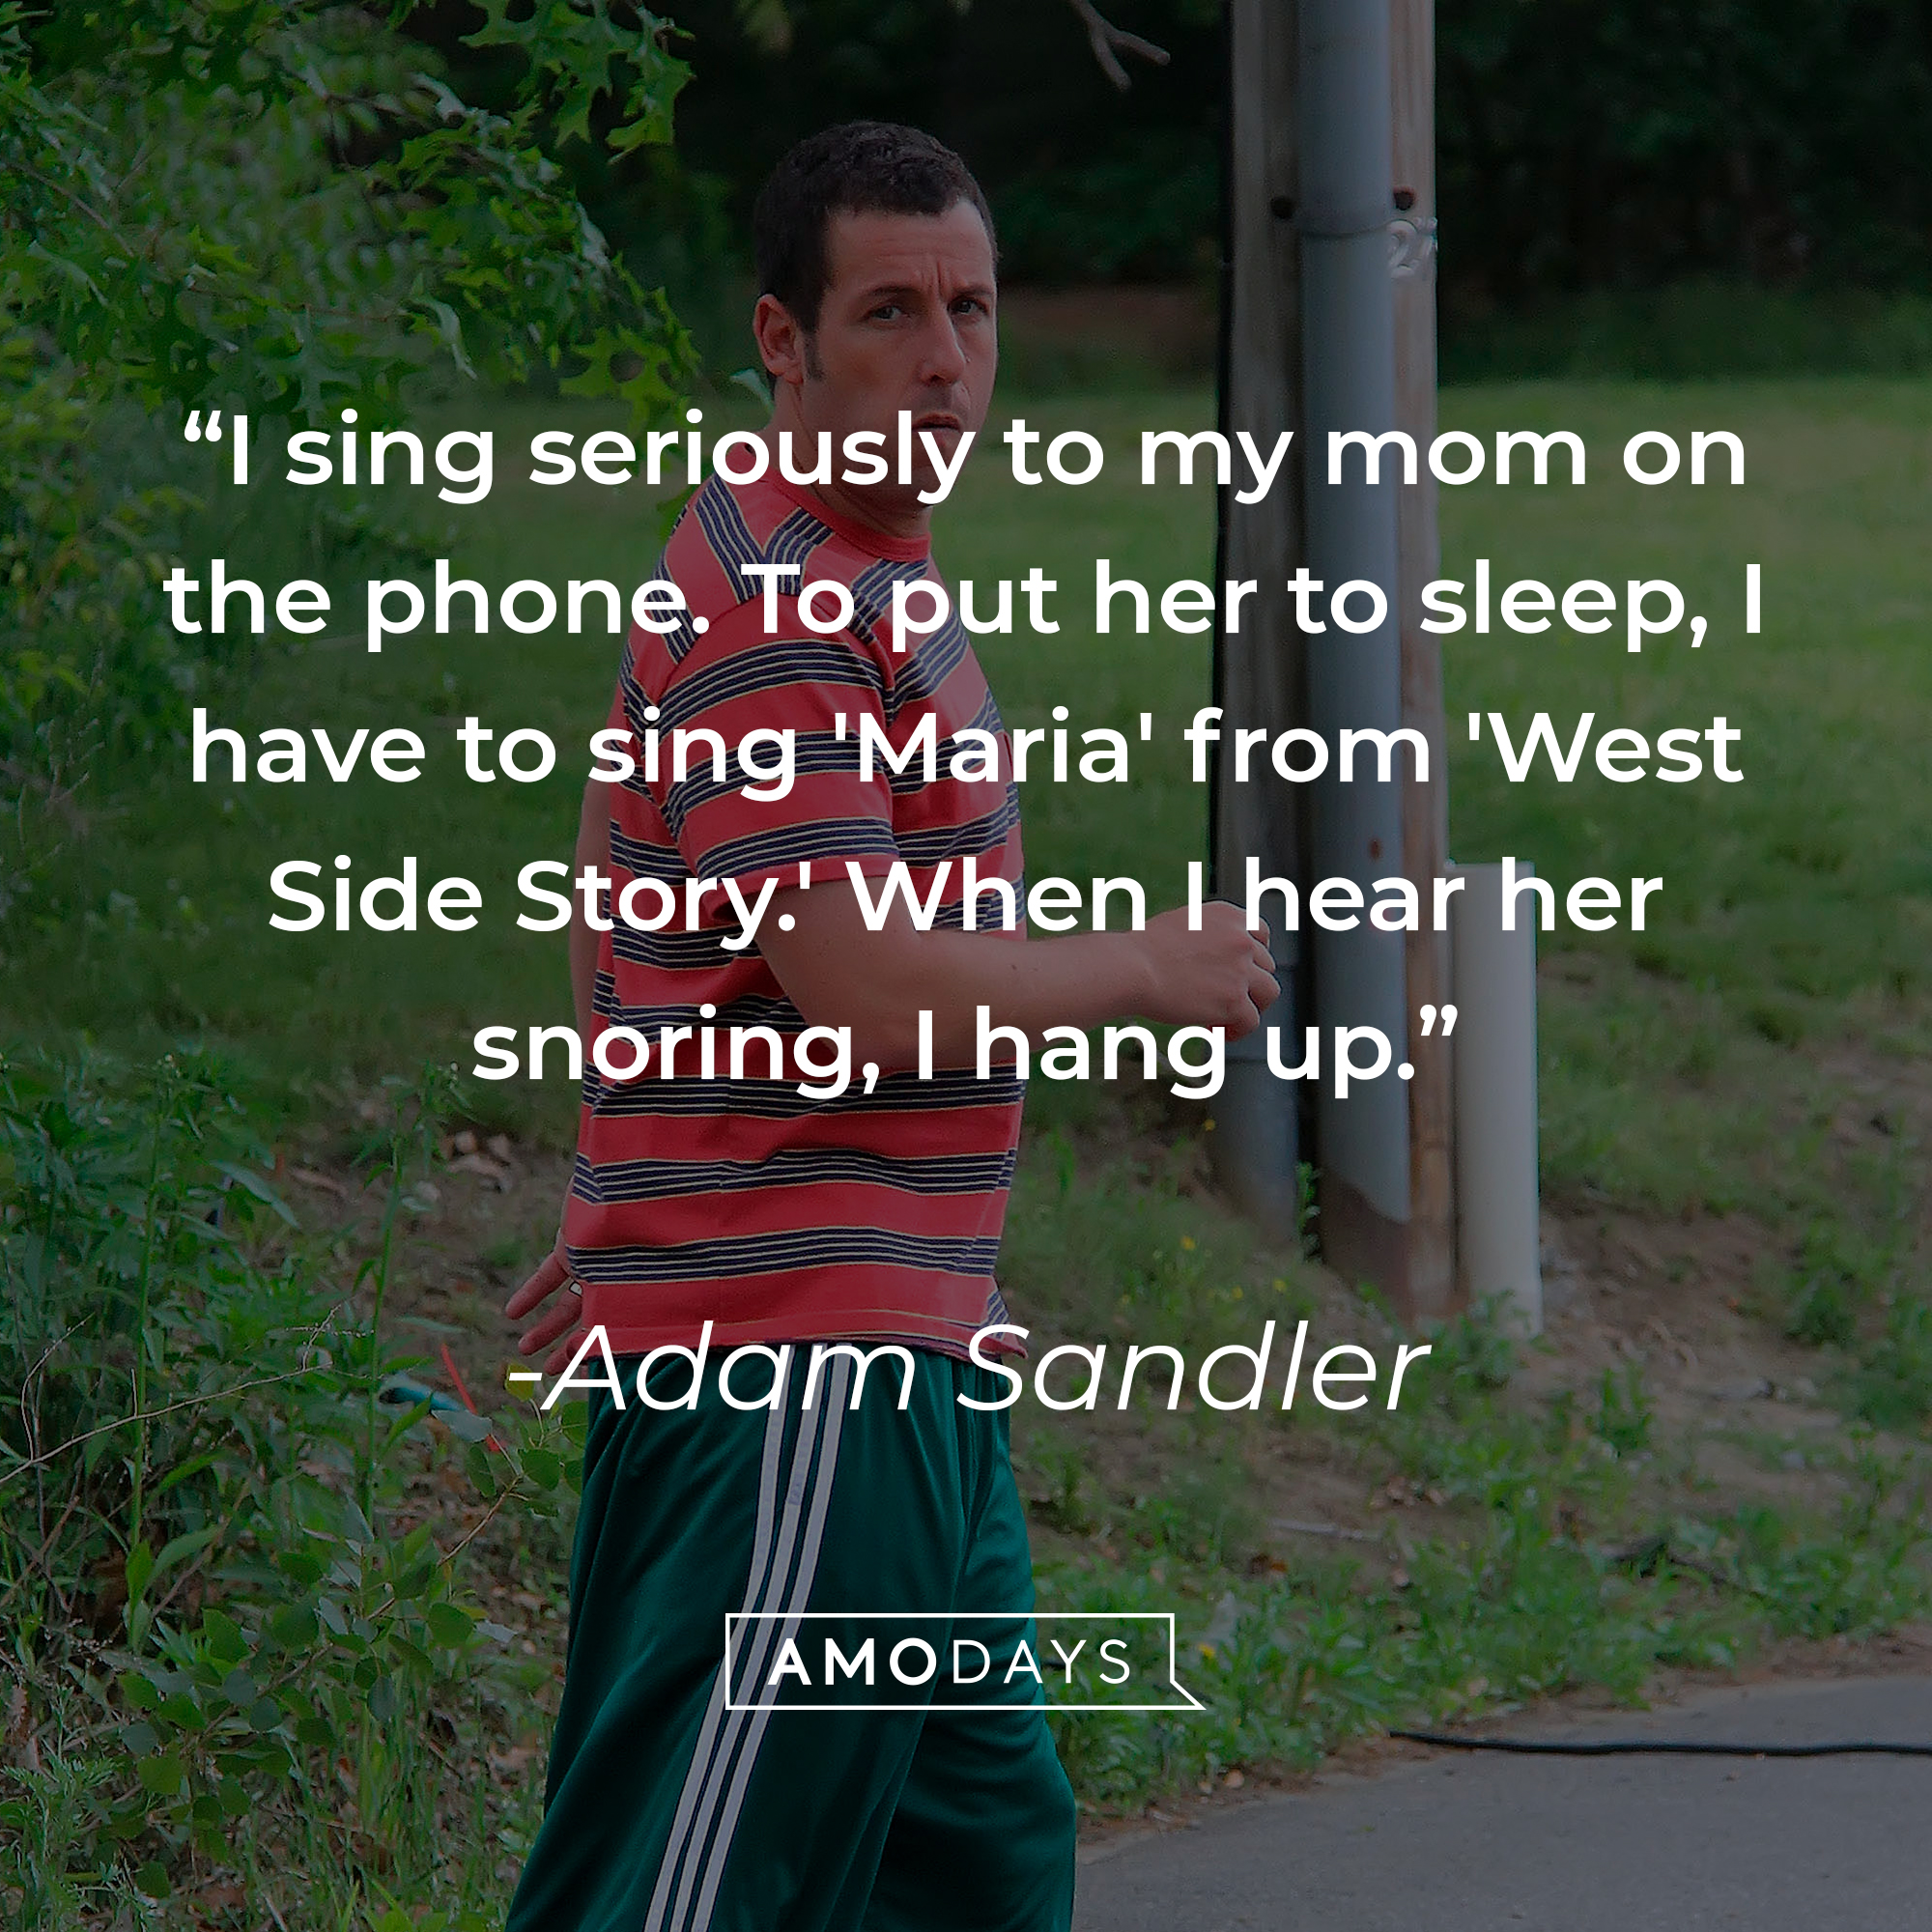 Adam Sandler's quote: "I sing seriously to my mom on the phone. To put her to sleep, I have to sing 'Maria' from 'West Side Story.' When I hear her snoring, I hang up." | Source: Getty Images